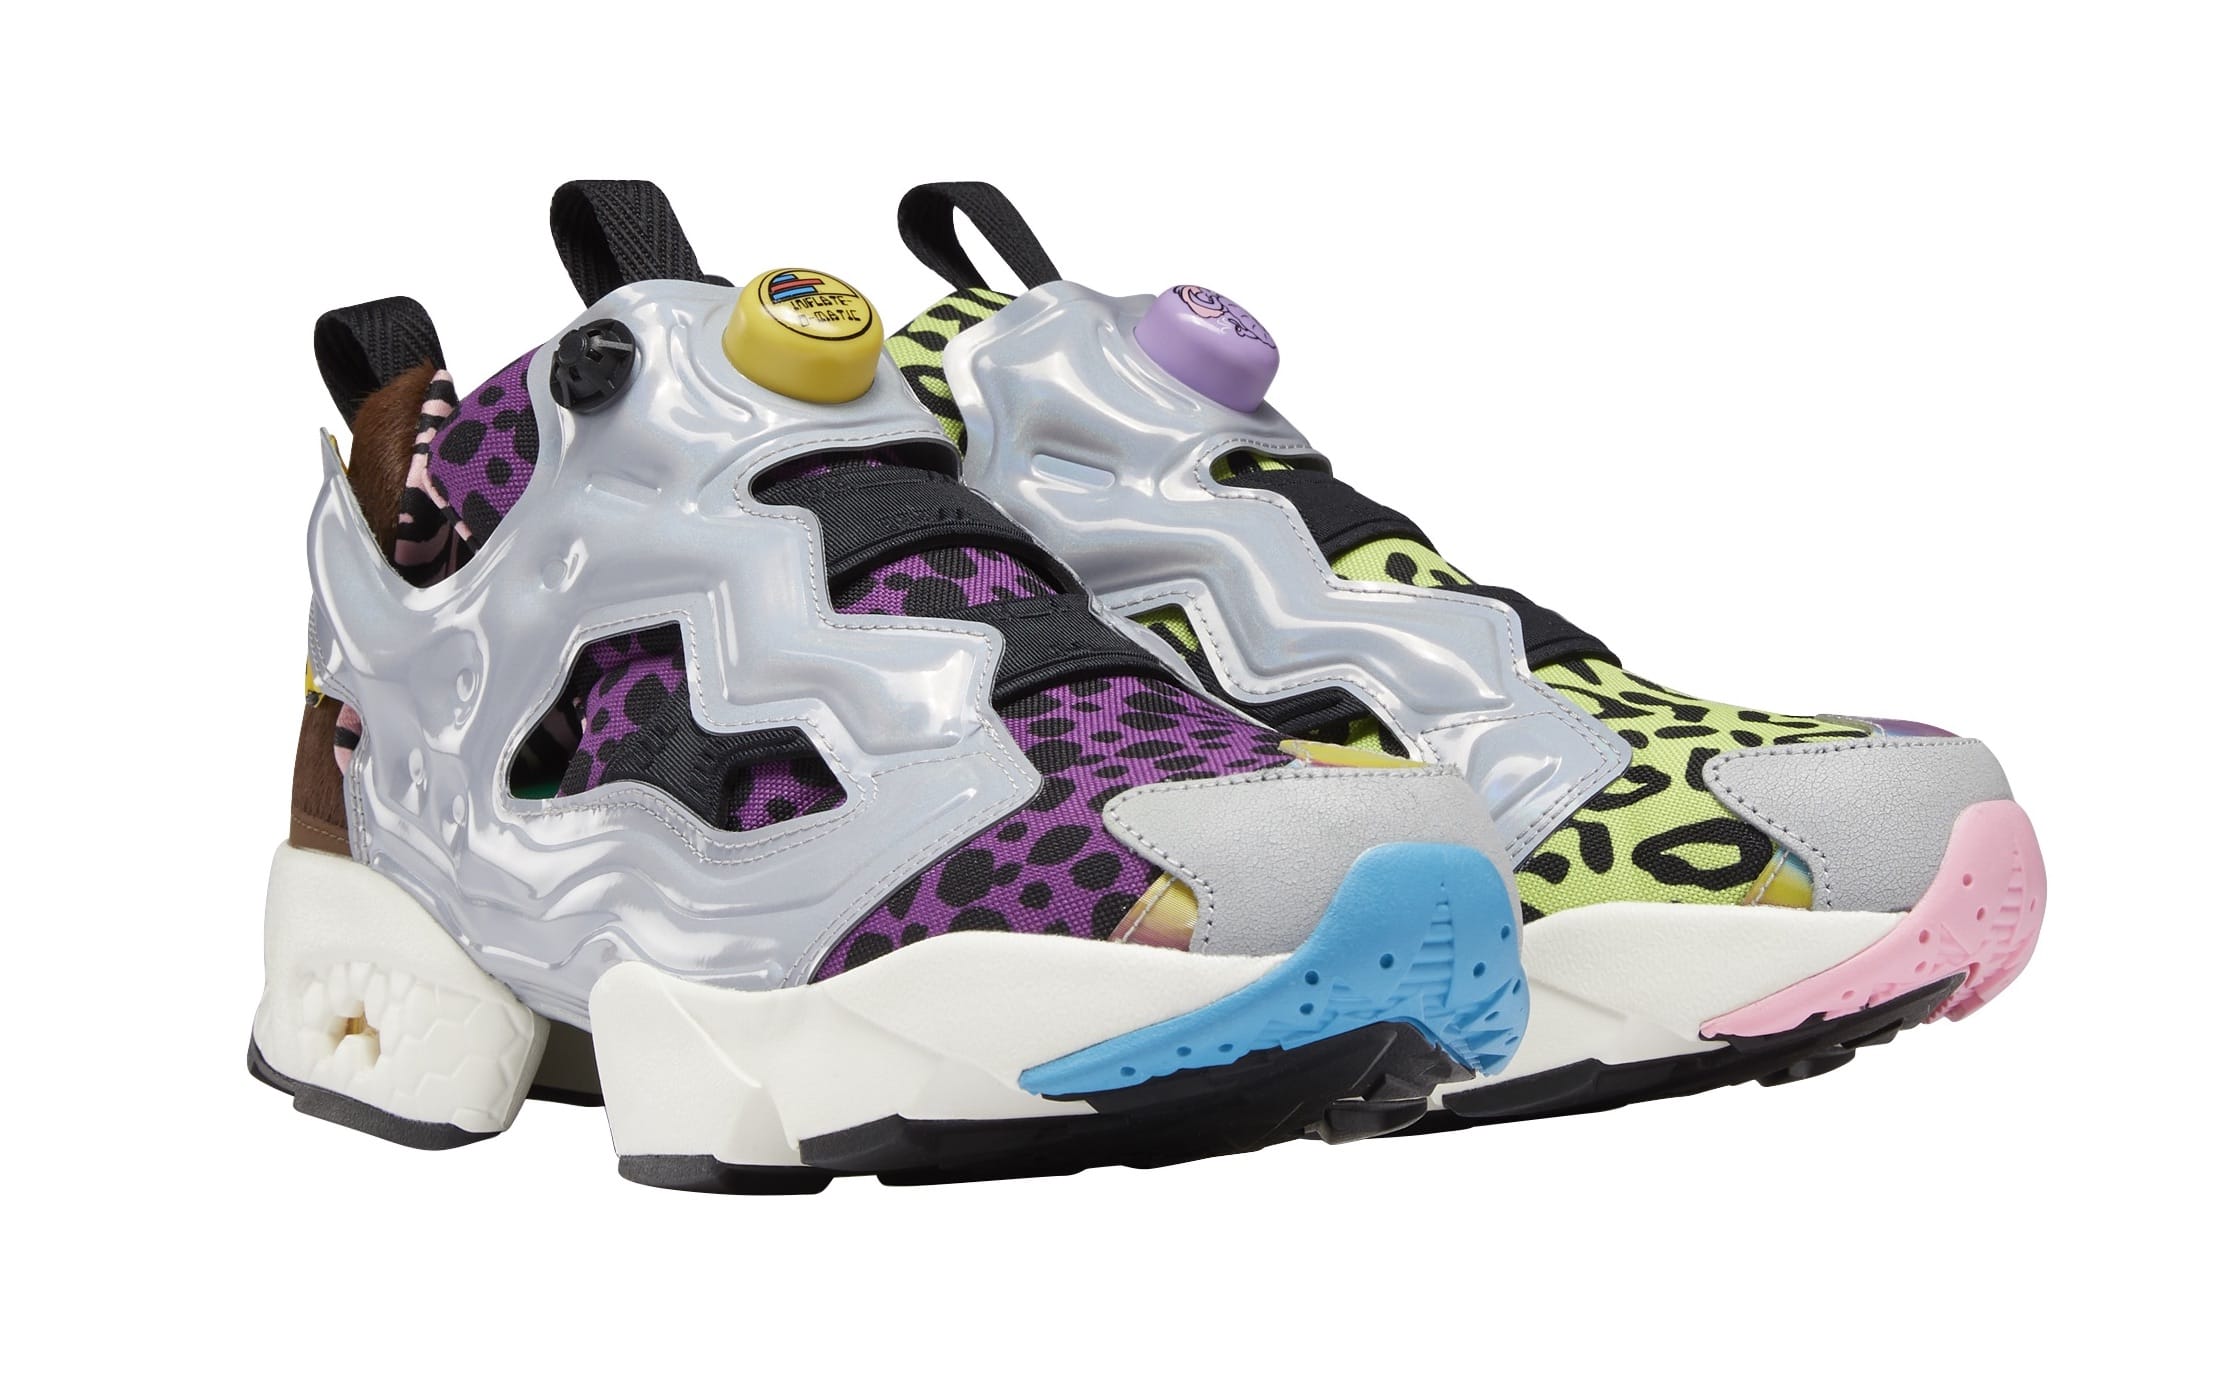 Reebok x The Jetsons & The Flintstones footwear and apparel collection.  Instapump Fury 94 shoes. Photo courtesy of Reebok.